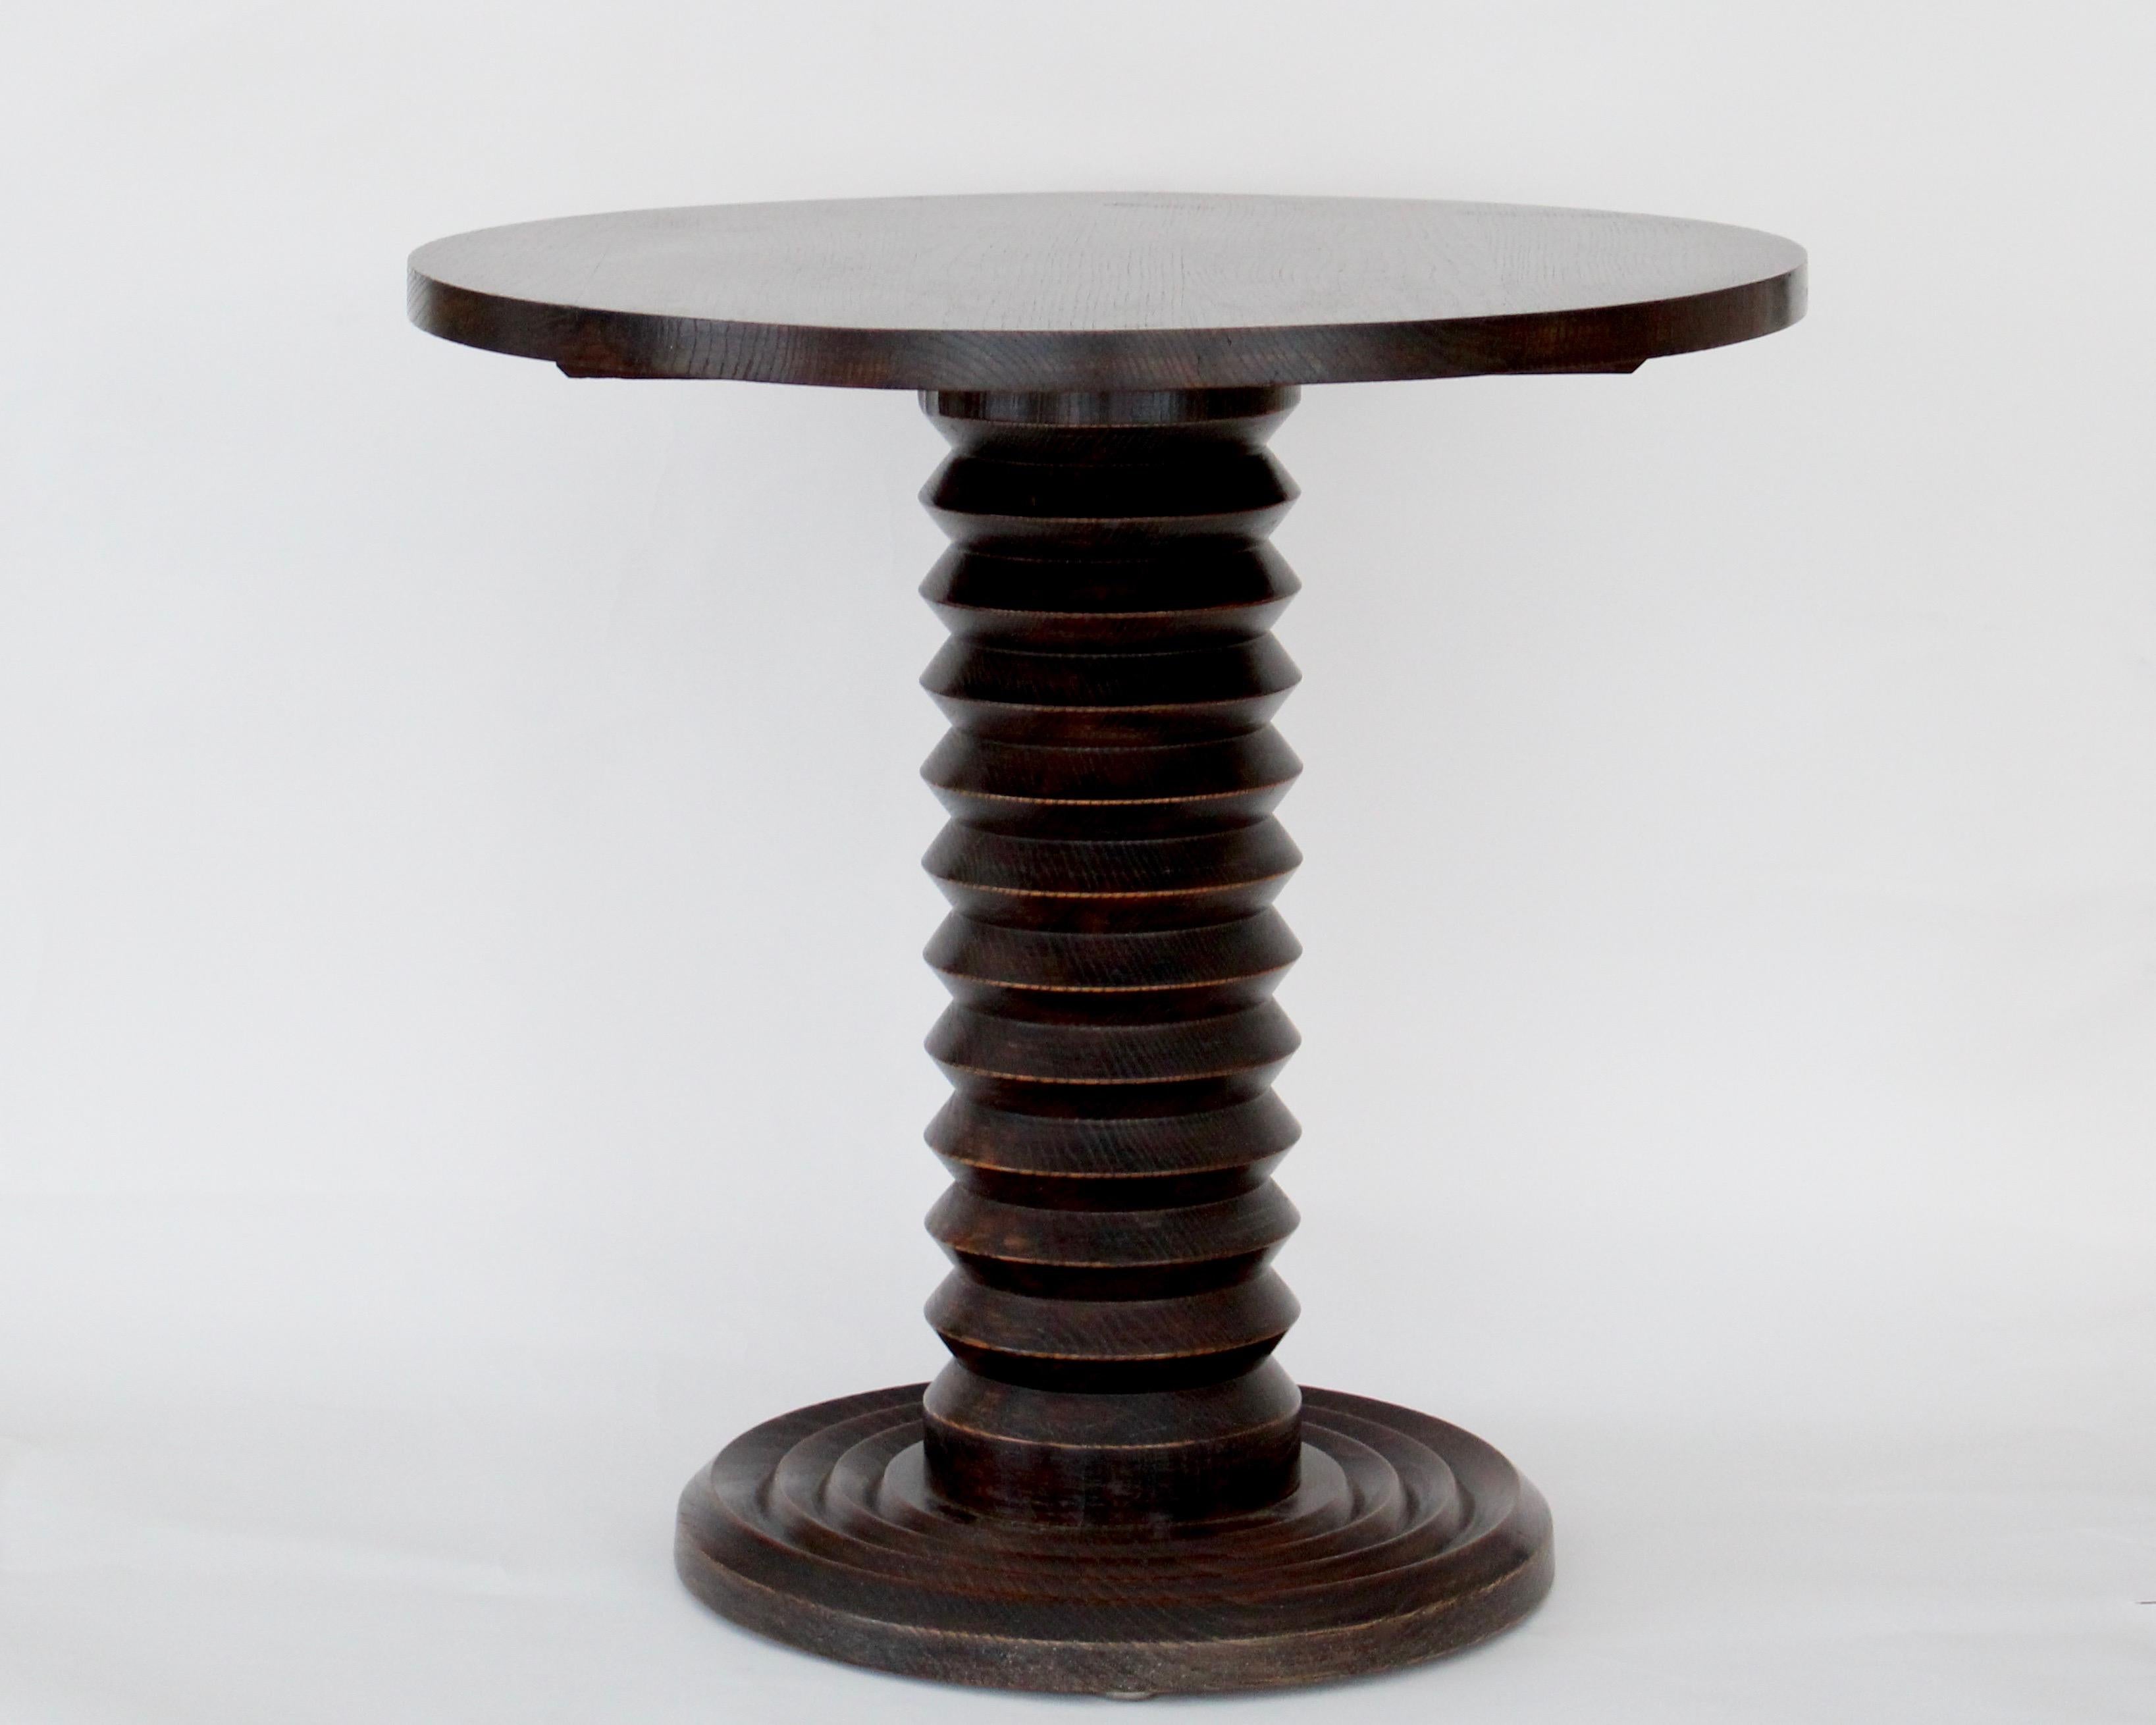 Charles Dudouyt French dark patinated oak side table or gueridon, c 1930.
Dudouyt's work was often characterized by the very dark patina he used on the oak and the corkscrew motif on the table center portion.
 